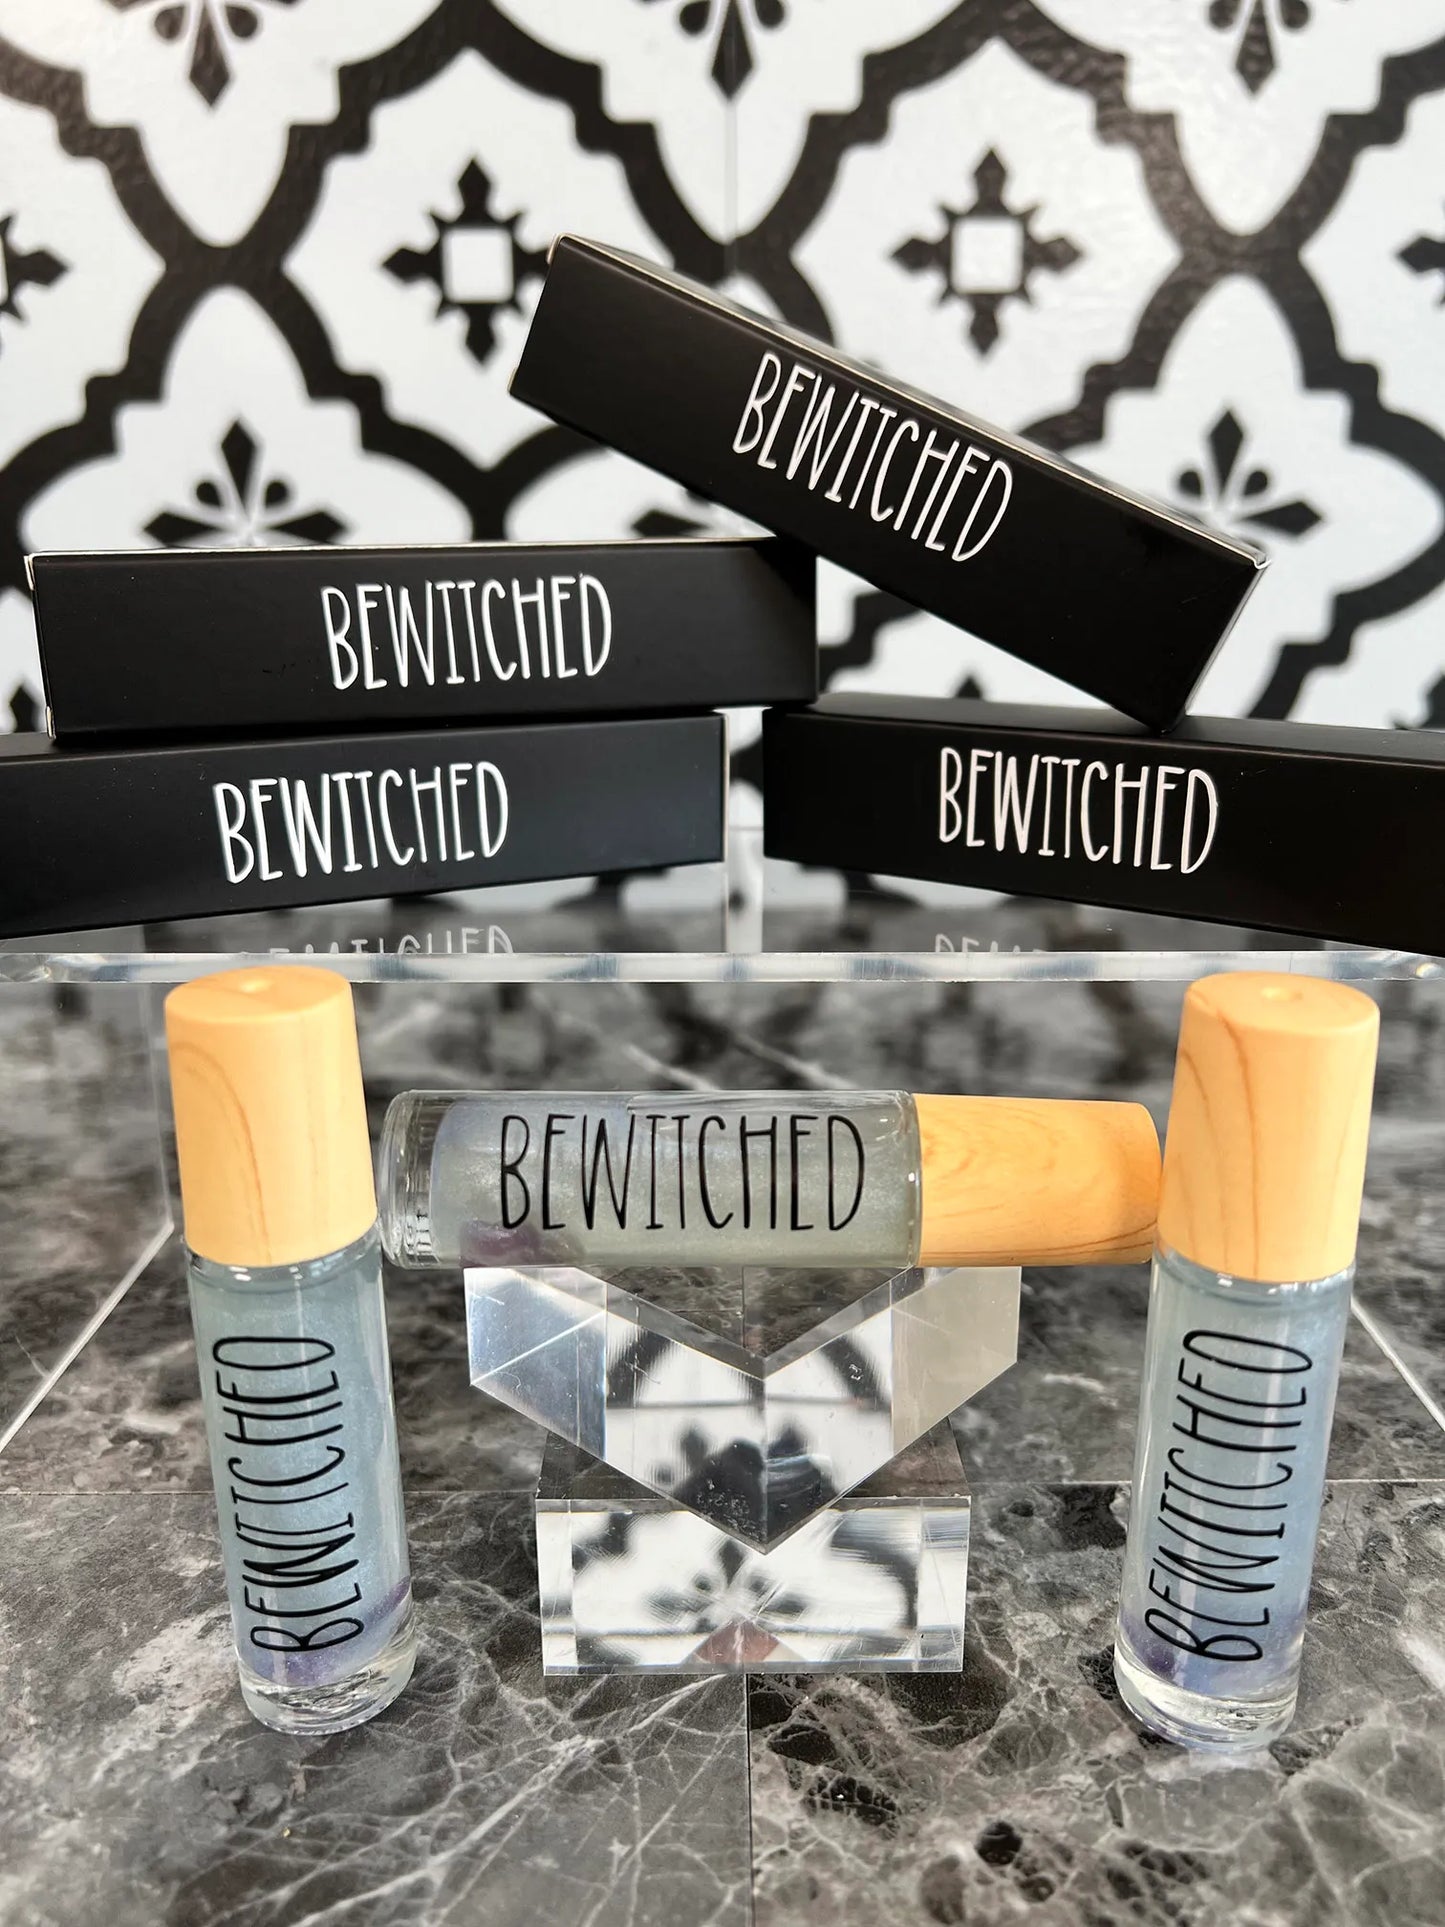 Bewitched - Pure Magic in a Bottle